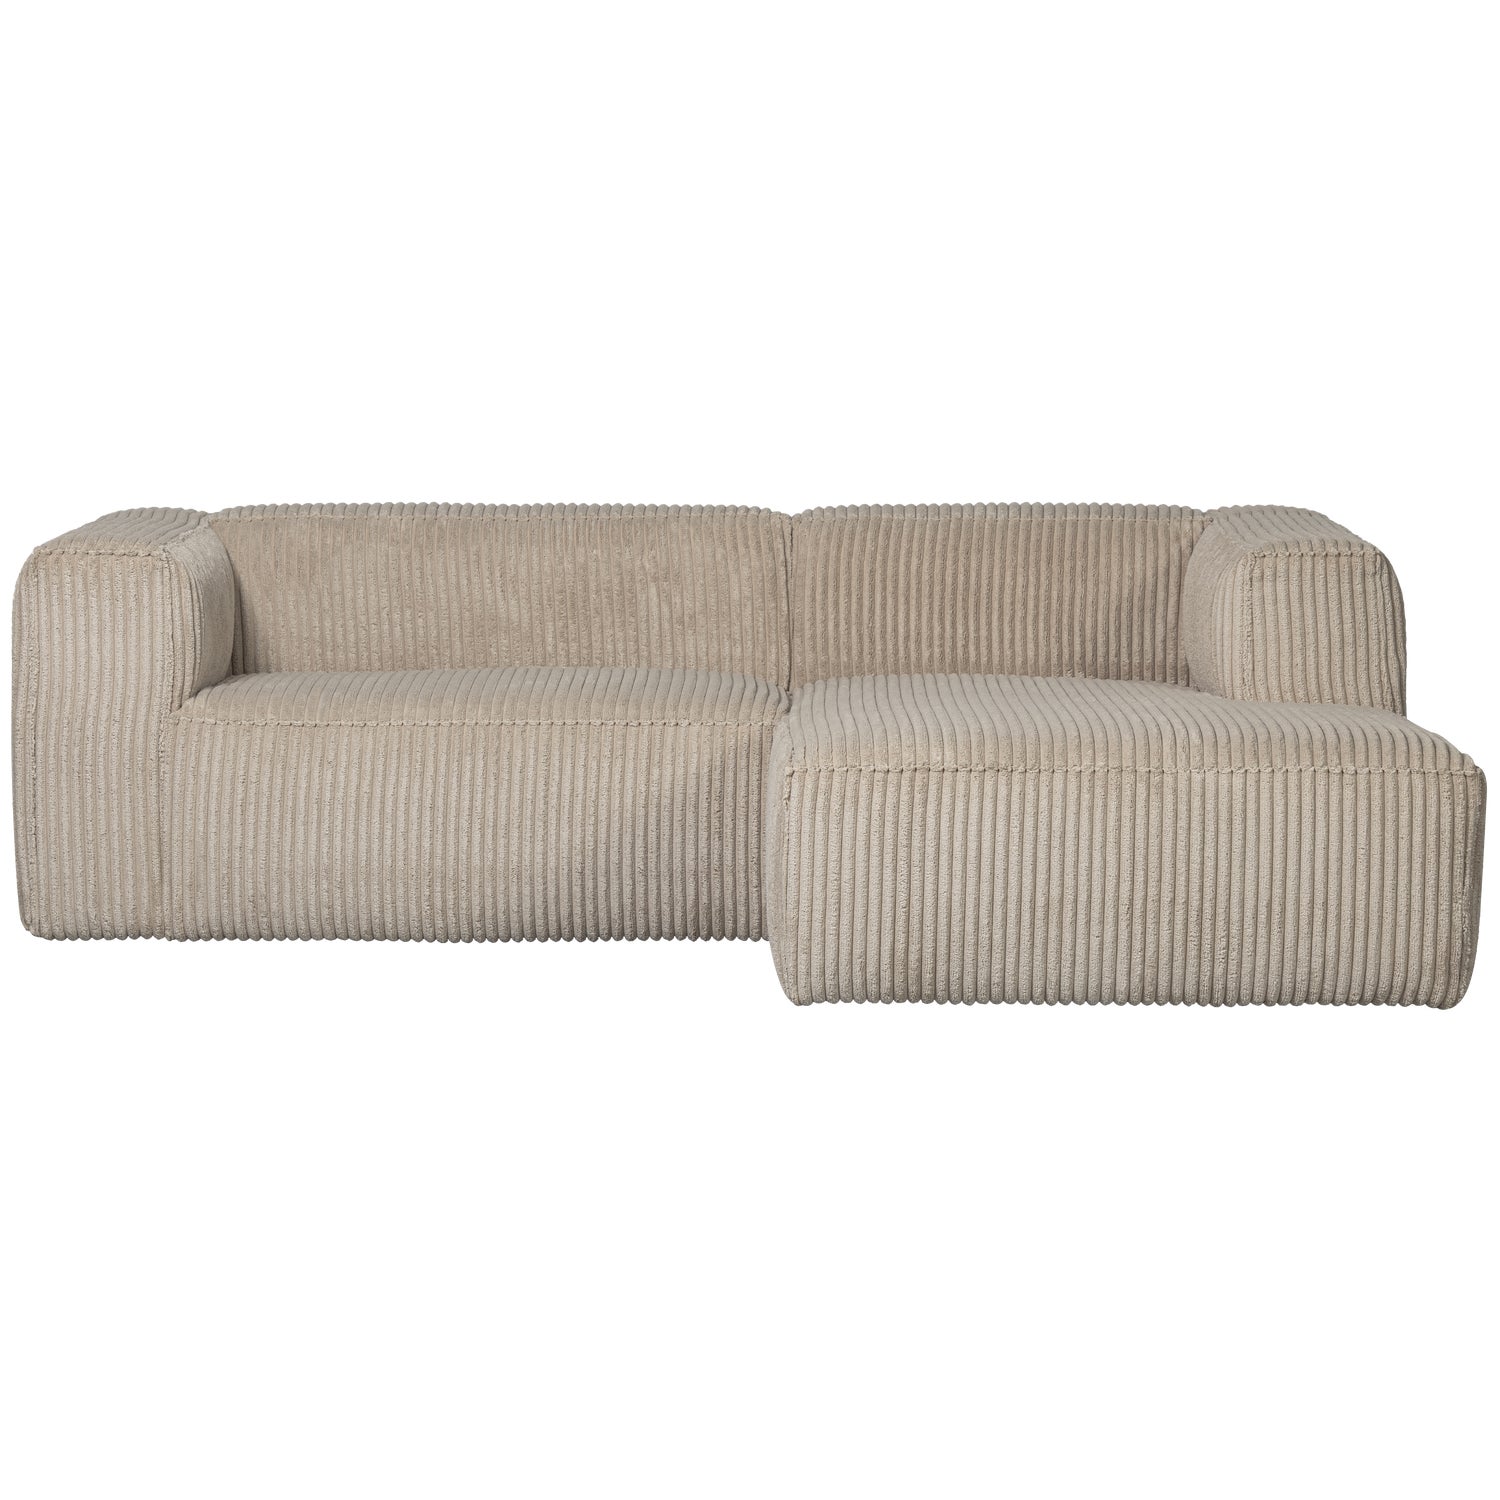 377433-RR-01_VS_WE_Bean_chaise_longue_links_grove_ribstof_travertin.png?auto=webp&format=png&width=1500&height=1500